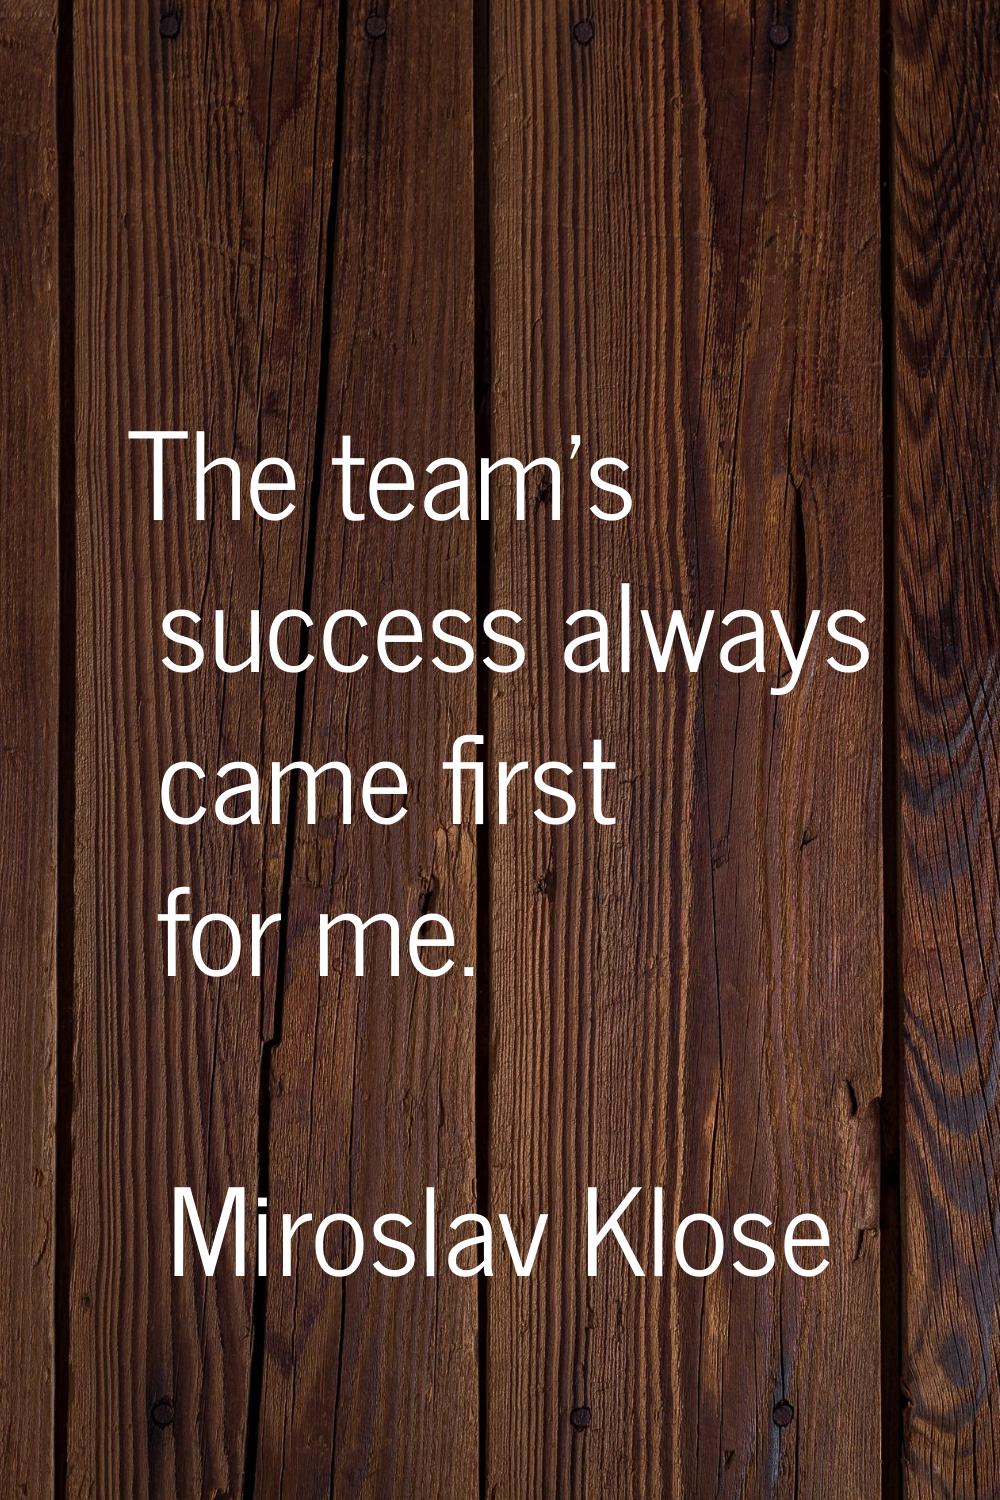 The team's success always came first for me.